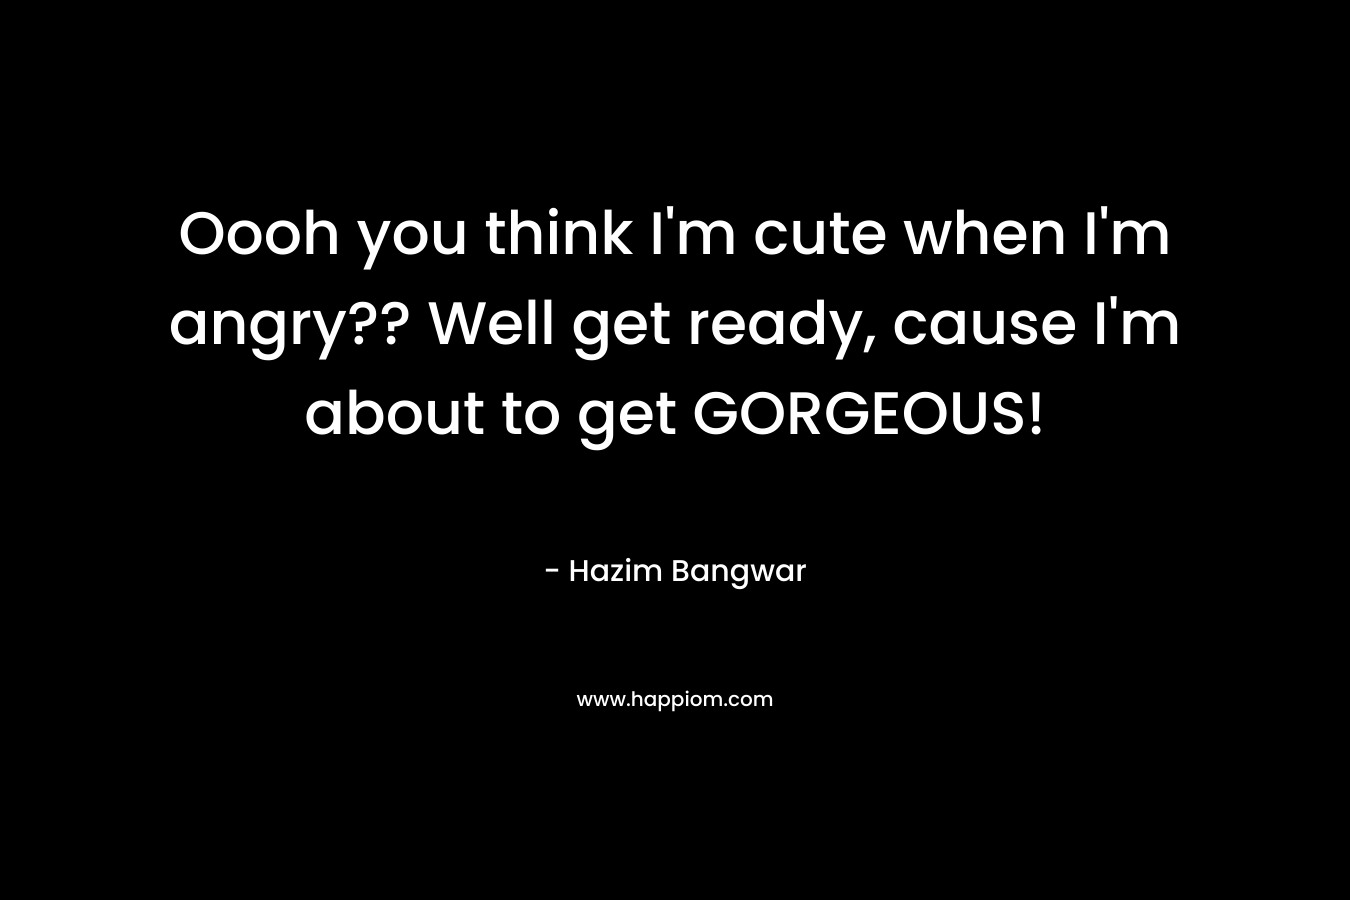 Oooh you think I’m cute when I’m angry?? Well get ready, cause I’m about to get GORGEOUS! – Hazim Bangwar